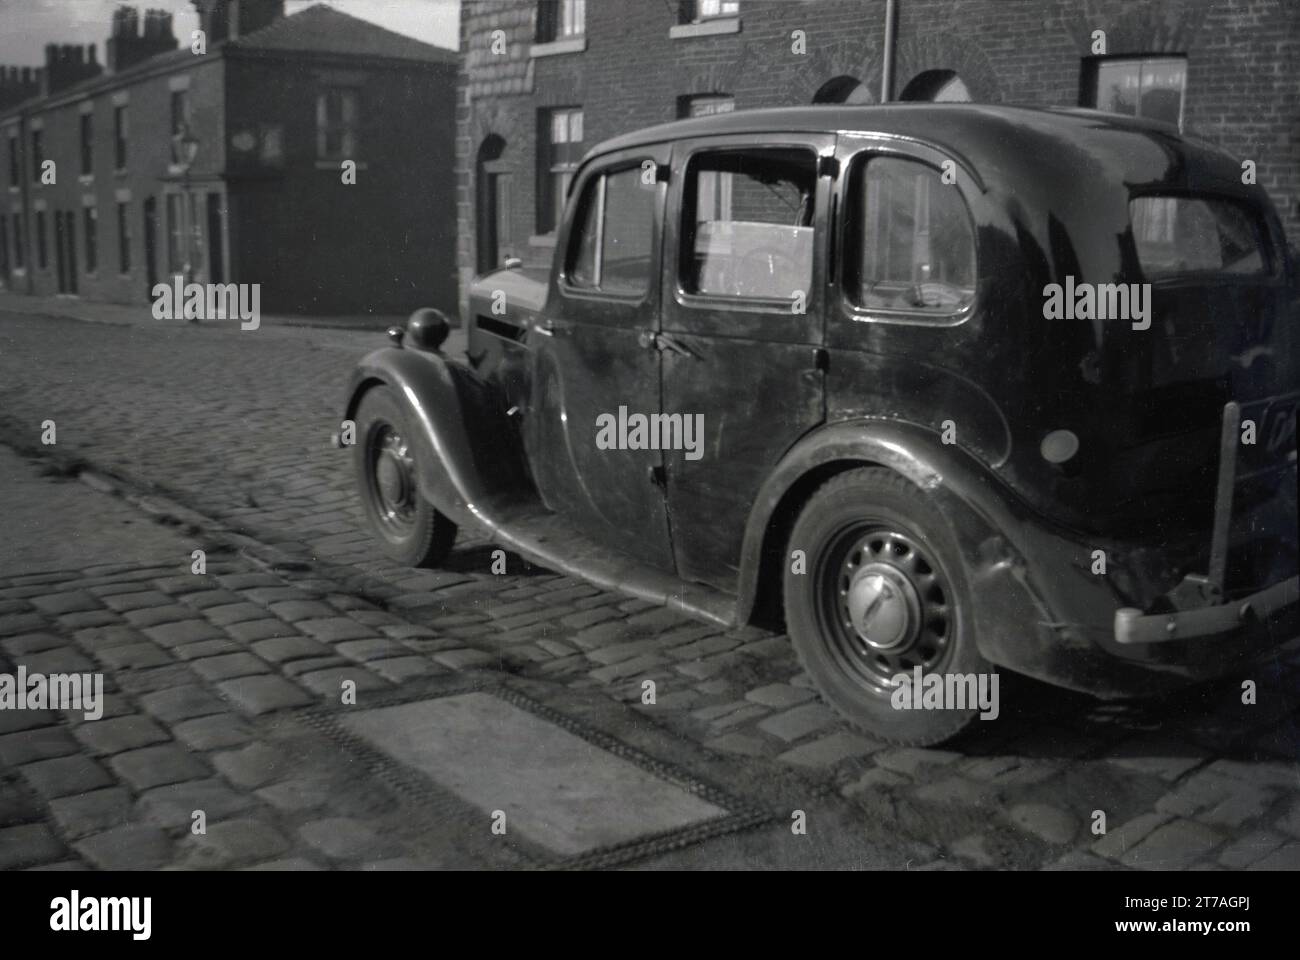 1950s, historical, car of the era parked on a cobbled street of small ...